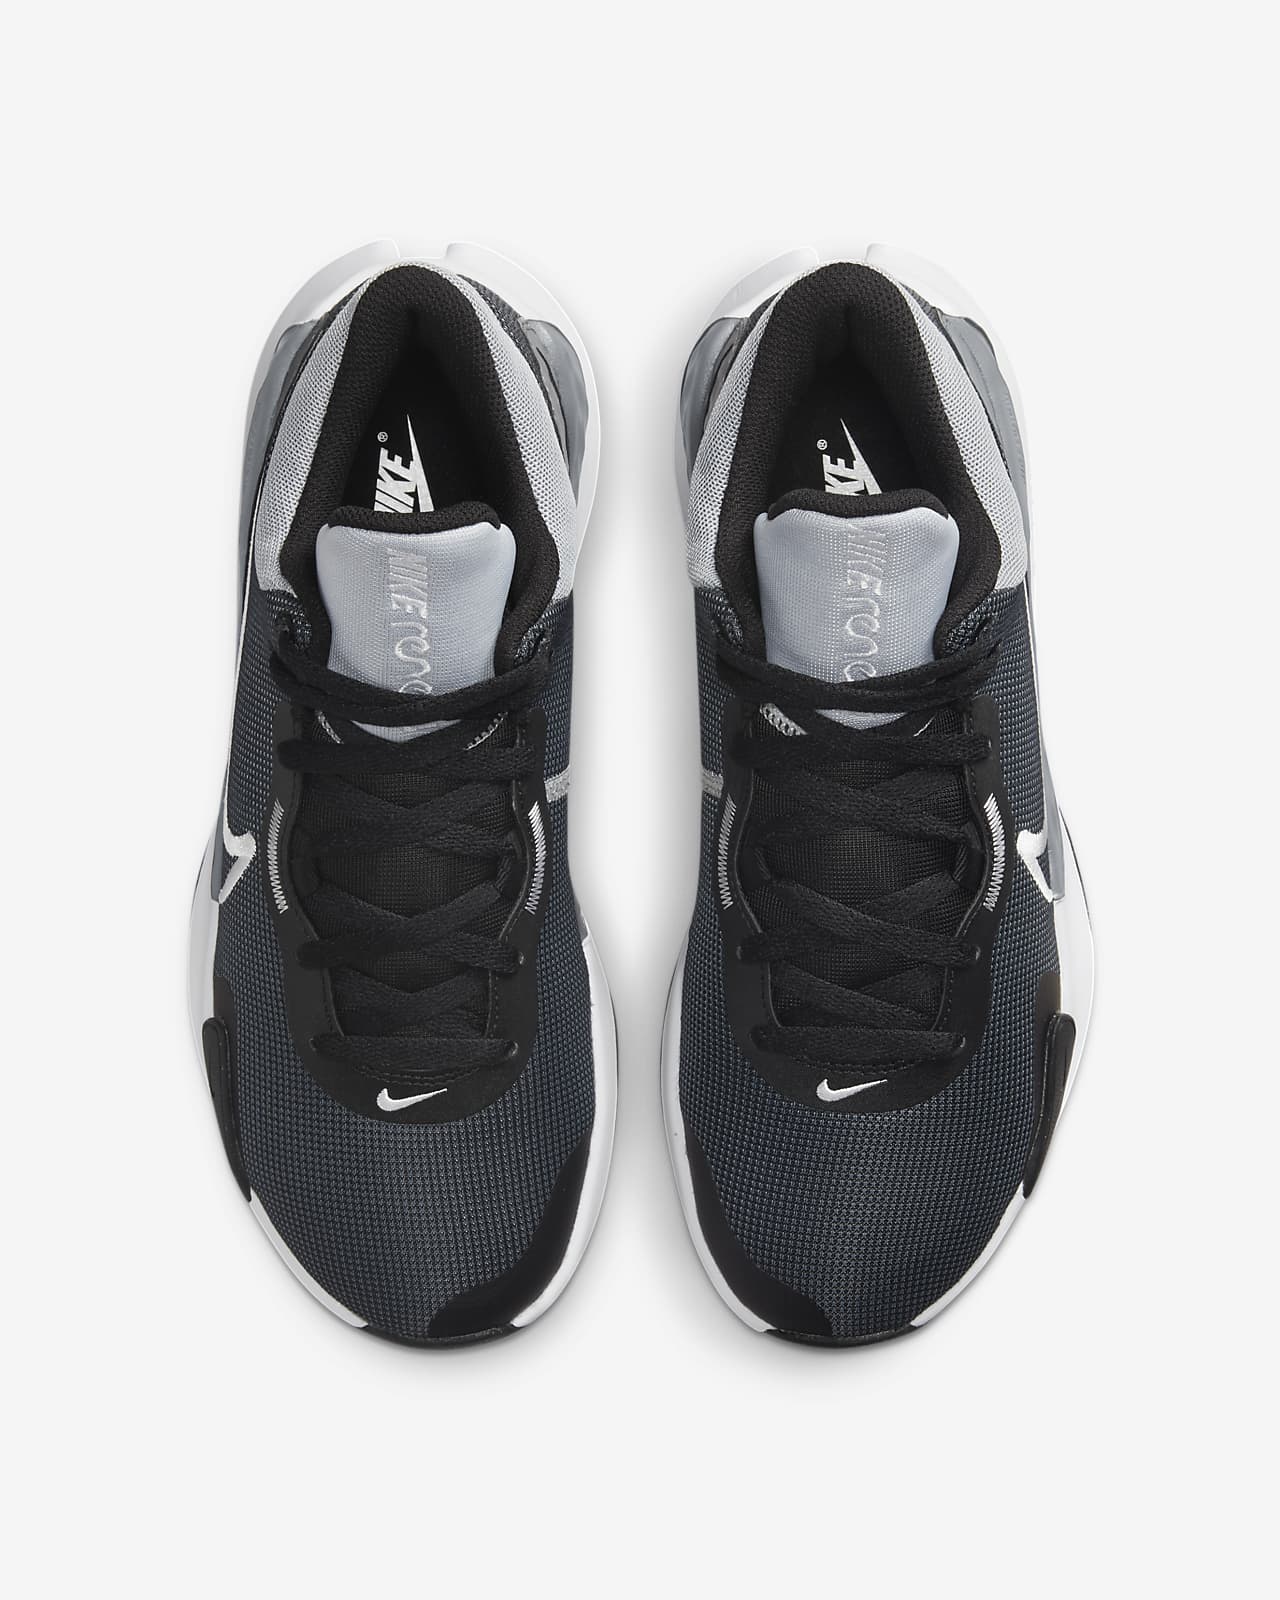 NIKE NK Renew Elevate 3 Basketball Shoes Basketball Shoes For Men - Buy NIKE  NK Renew Elevate 3 Basketball Shoes Basketball Shoes For Men Online at Best  Price - Shop Online for